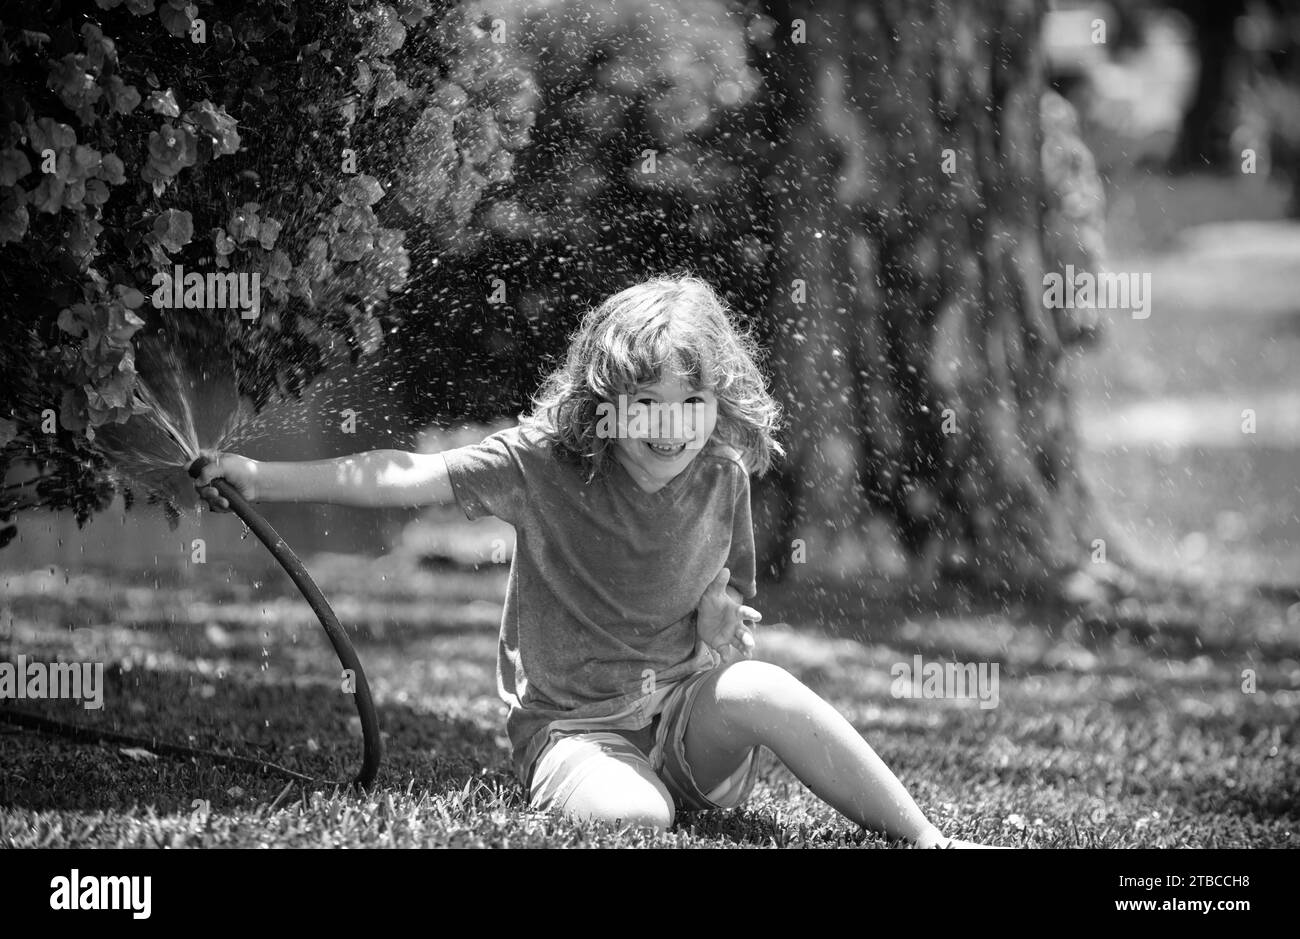 Happy kid boy pours water from a hose. Child watering flowers in garden. Home gardening Stock Photo